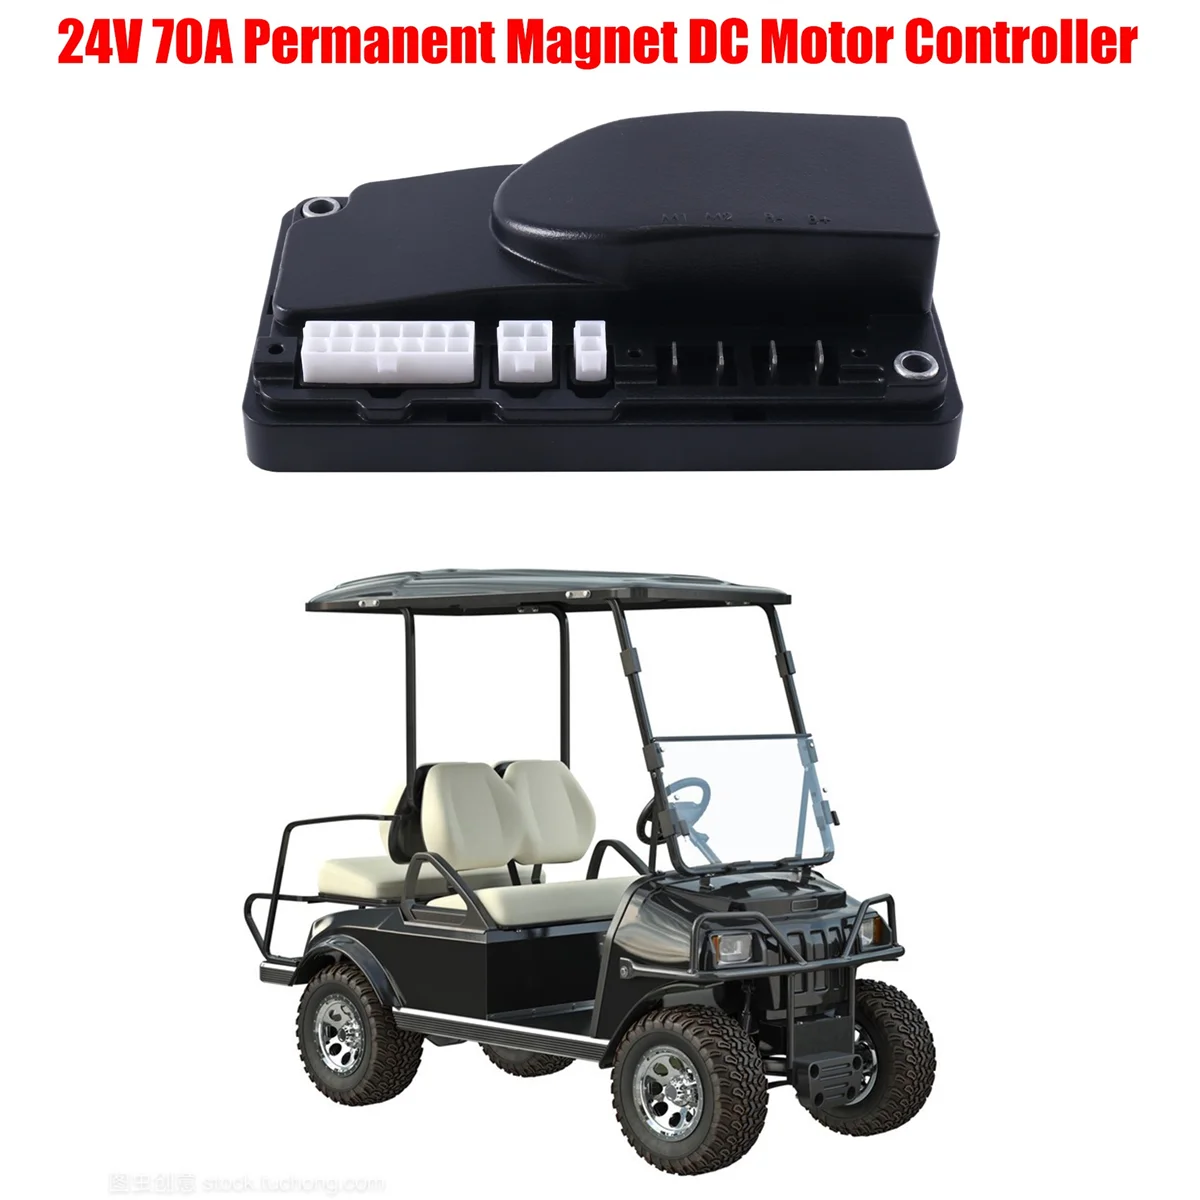 1212-2401 24V 70A Permanent Magnet DC Motor Controller for Scooter Golf Cart Club Car Electric